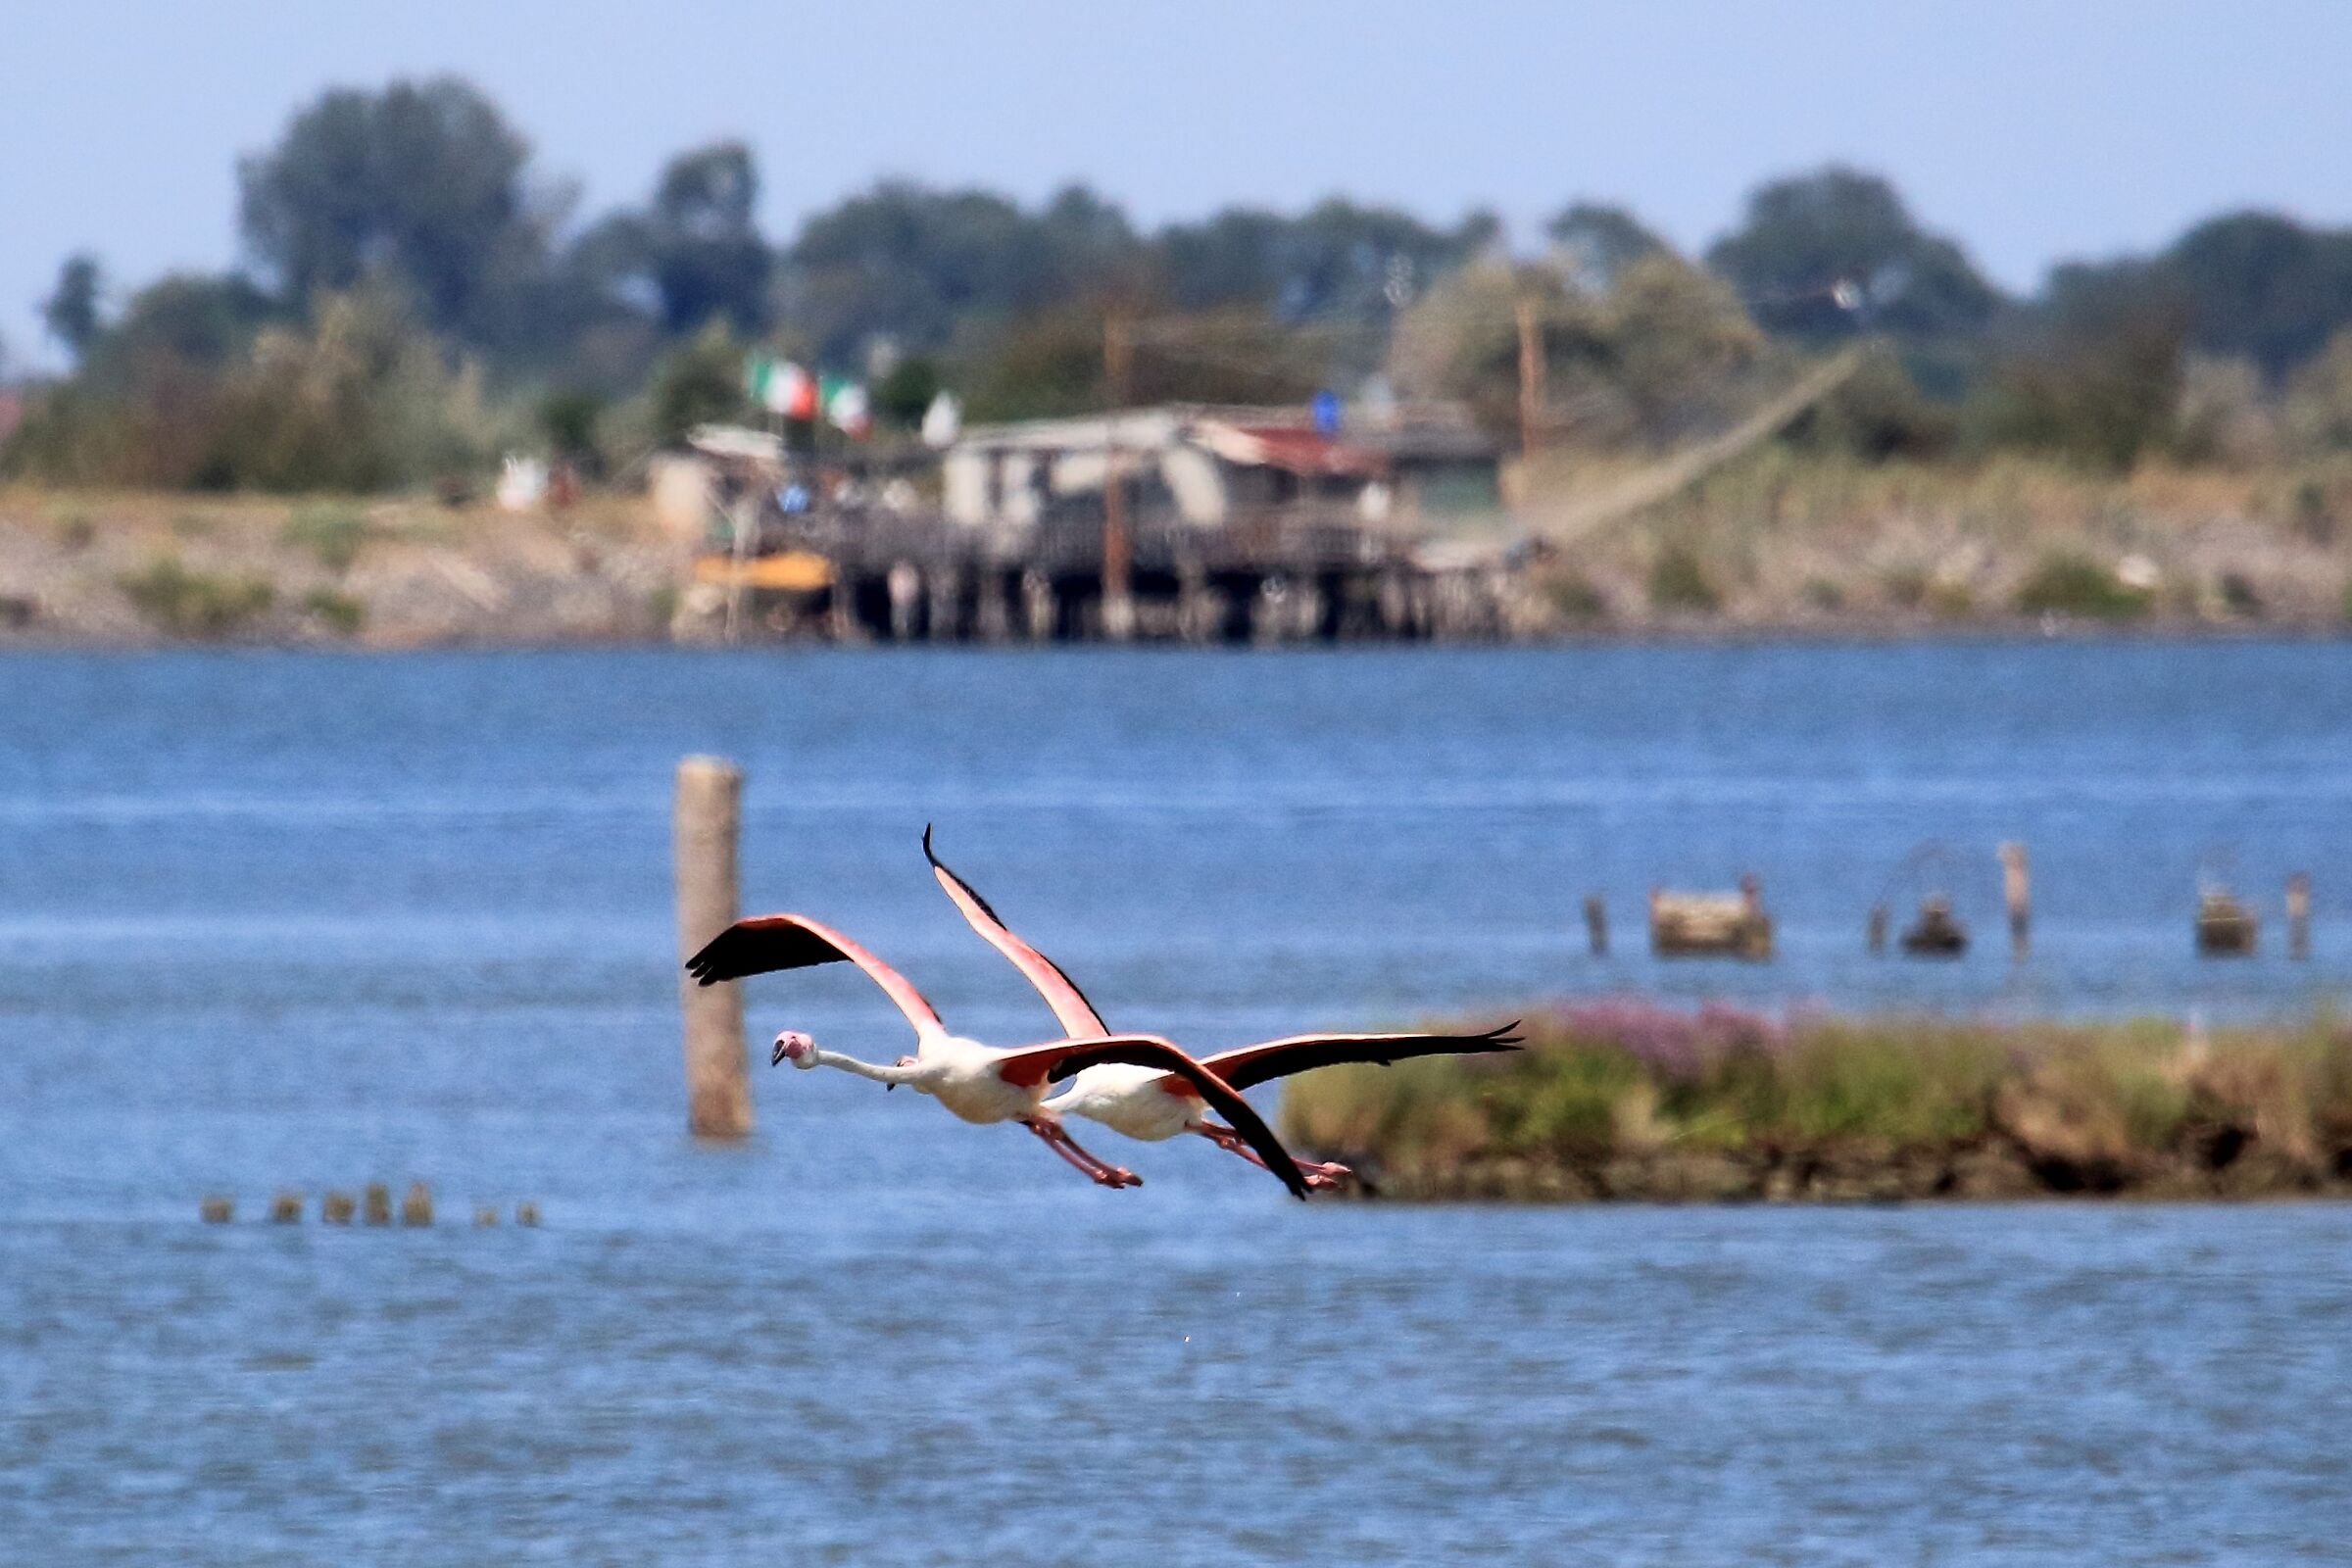 Take-off from the salt pan...